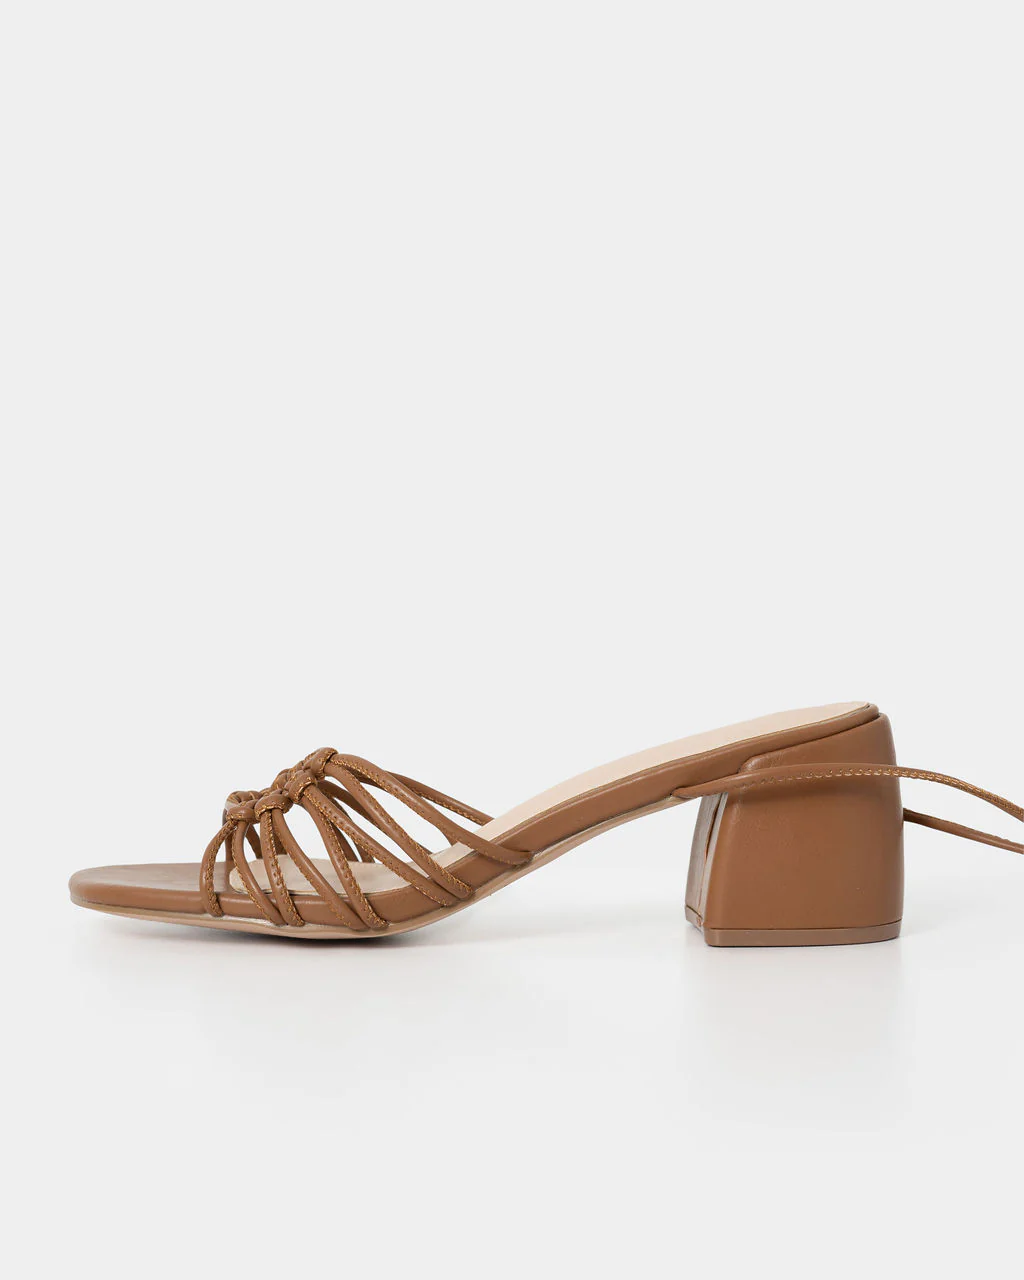 Celia Strappy Lace Up Heels - Tan - LAST CHANCE